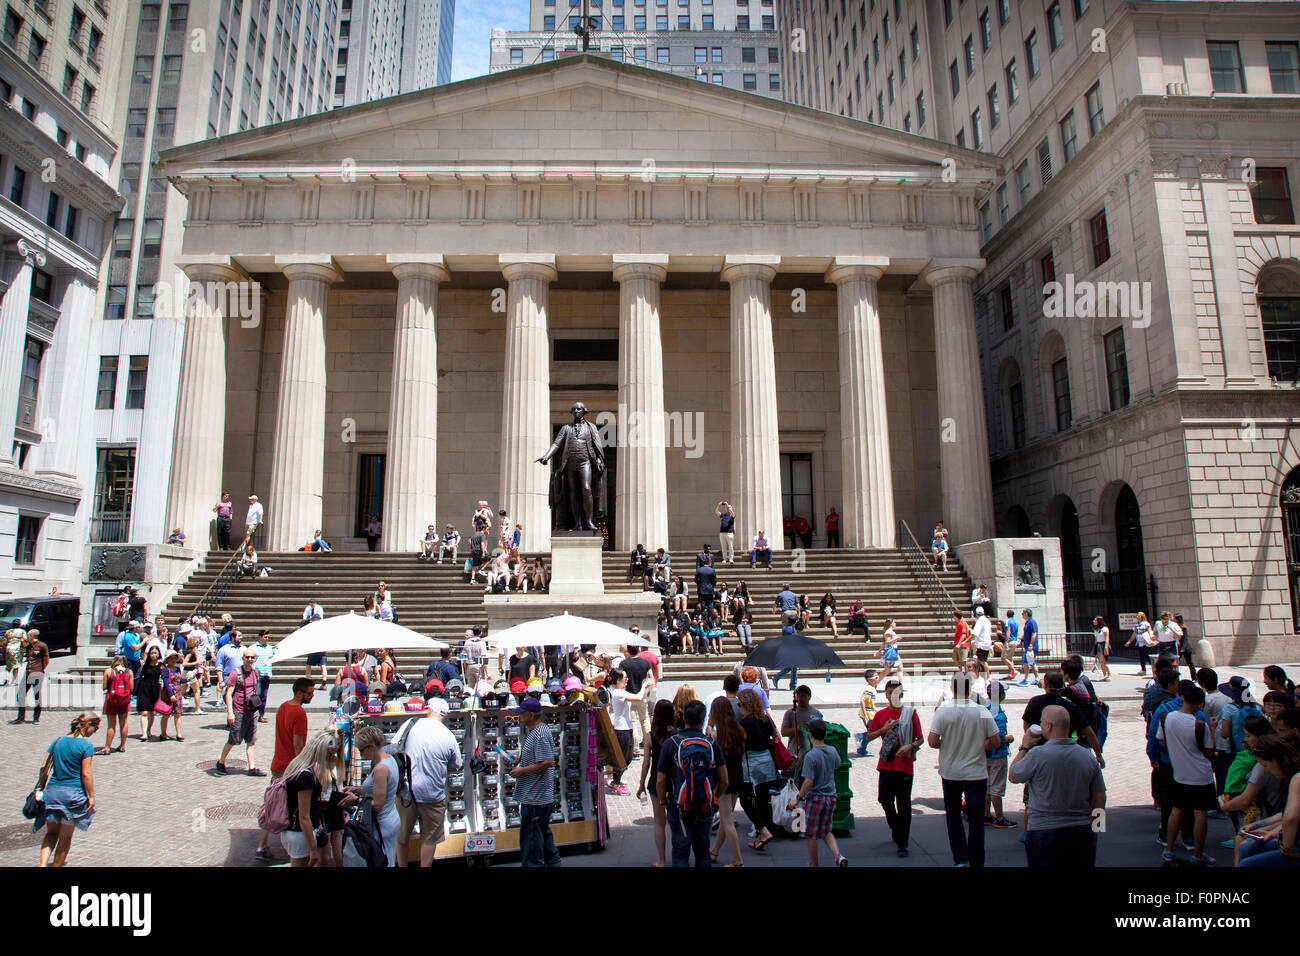 USA, New York State, New York City, Manhattan, Exterior of Federal Hall with statue of George Washington outside. Stock Photo